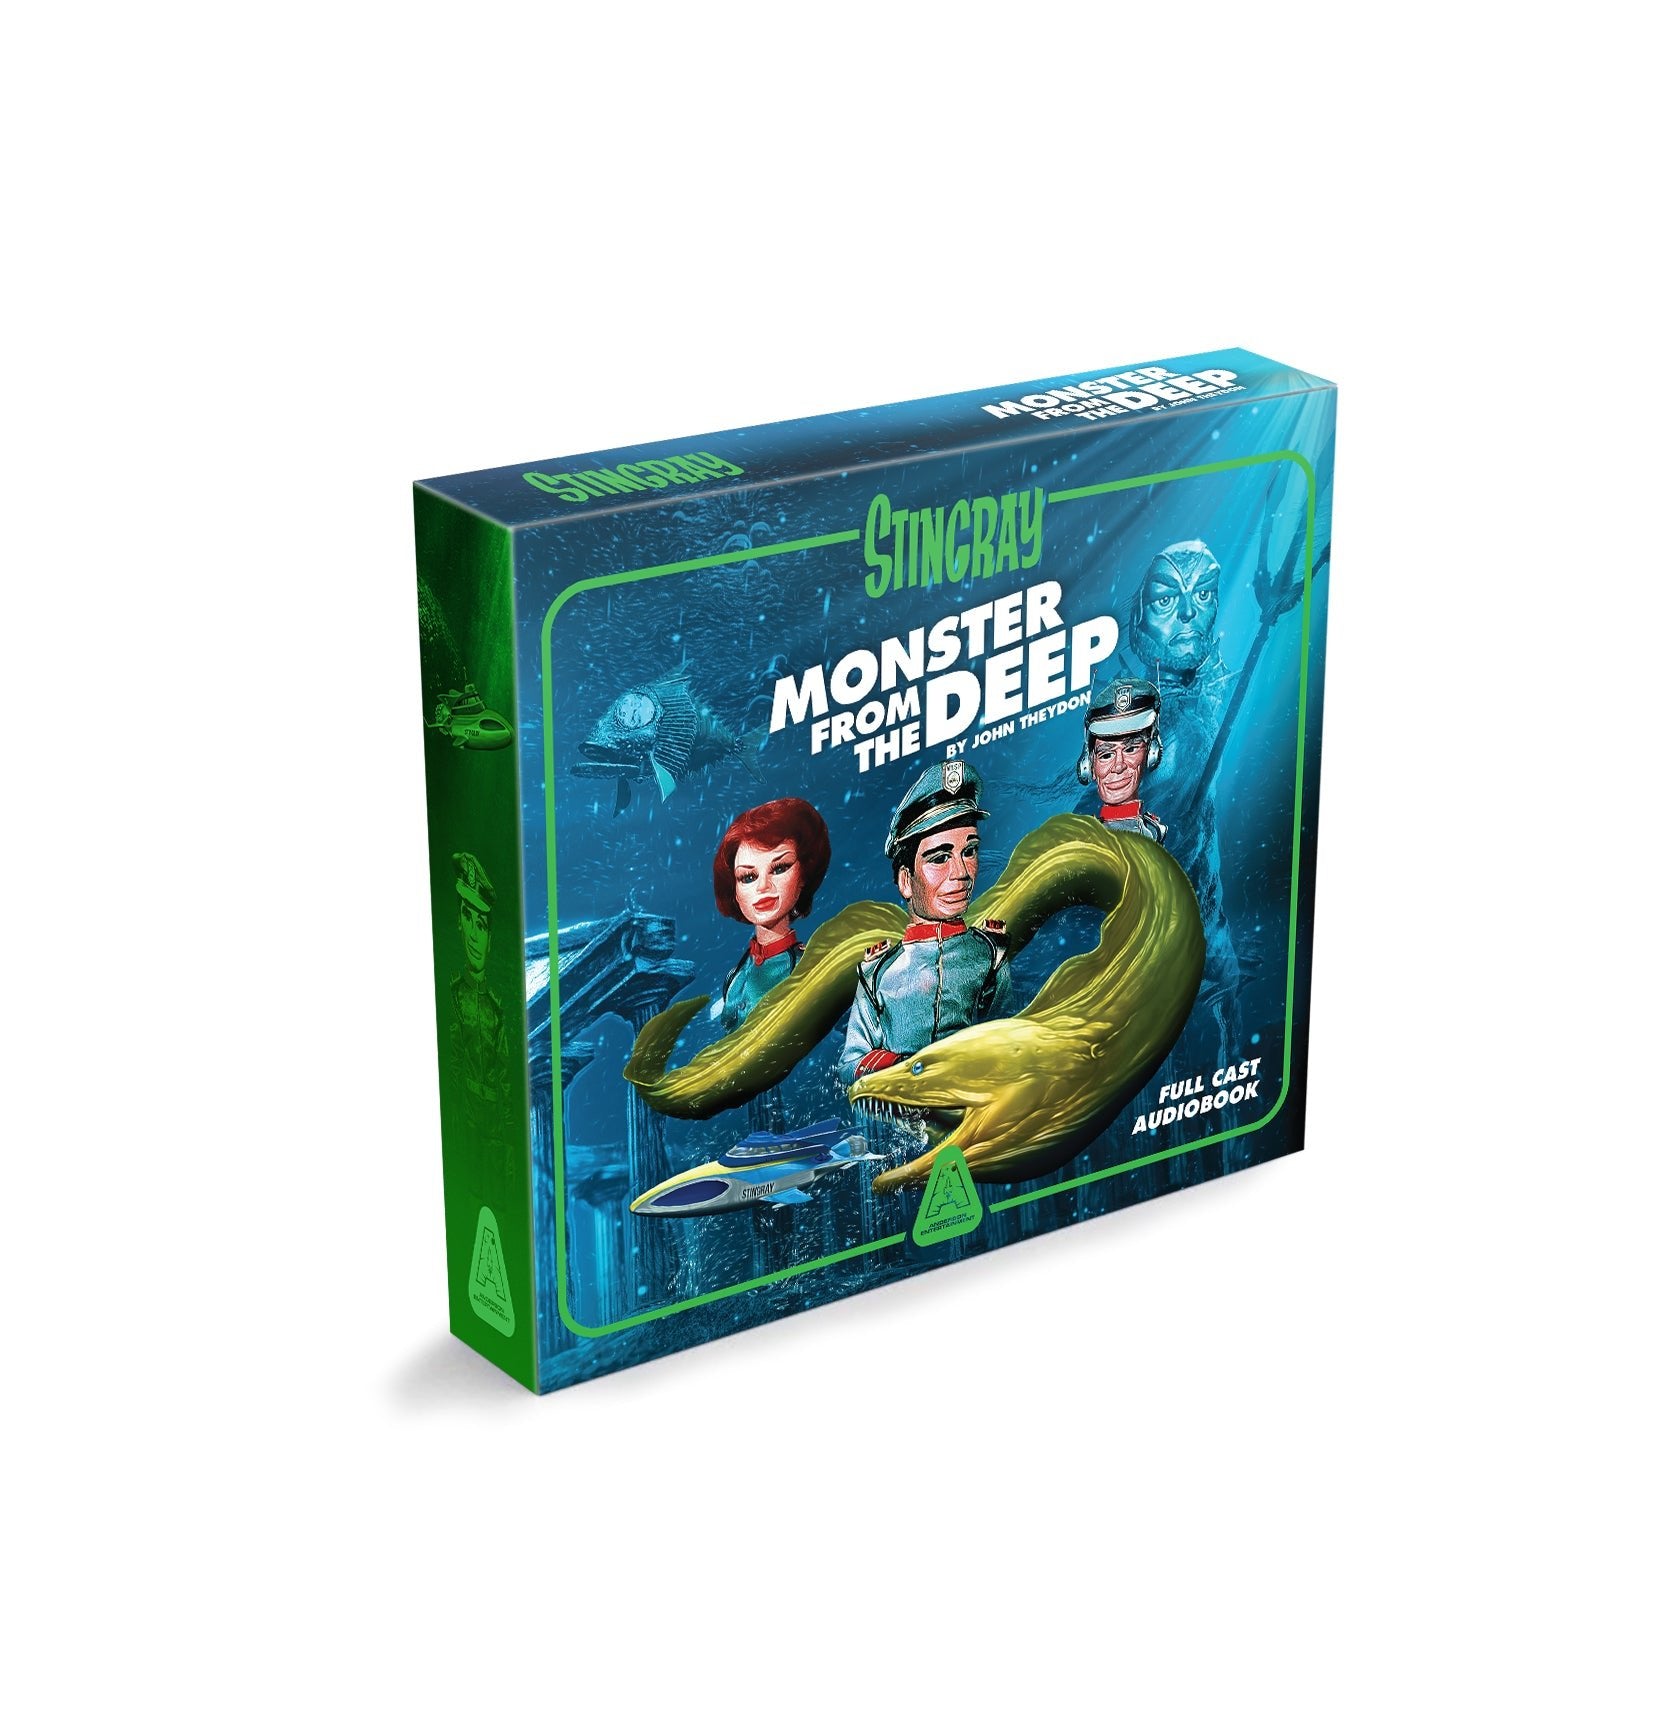 Monster from the Deep Trailer - The Gerry Anderson Store